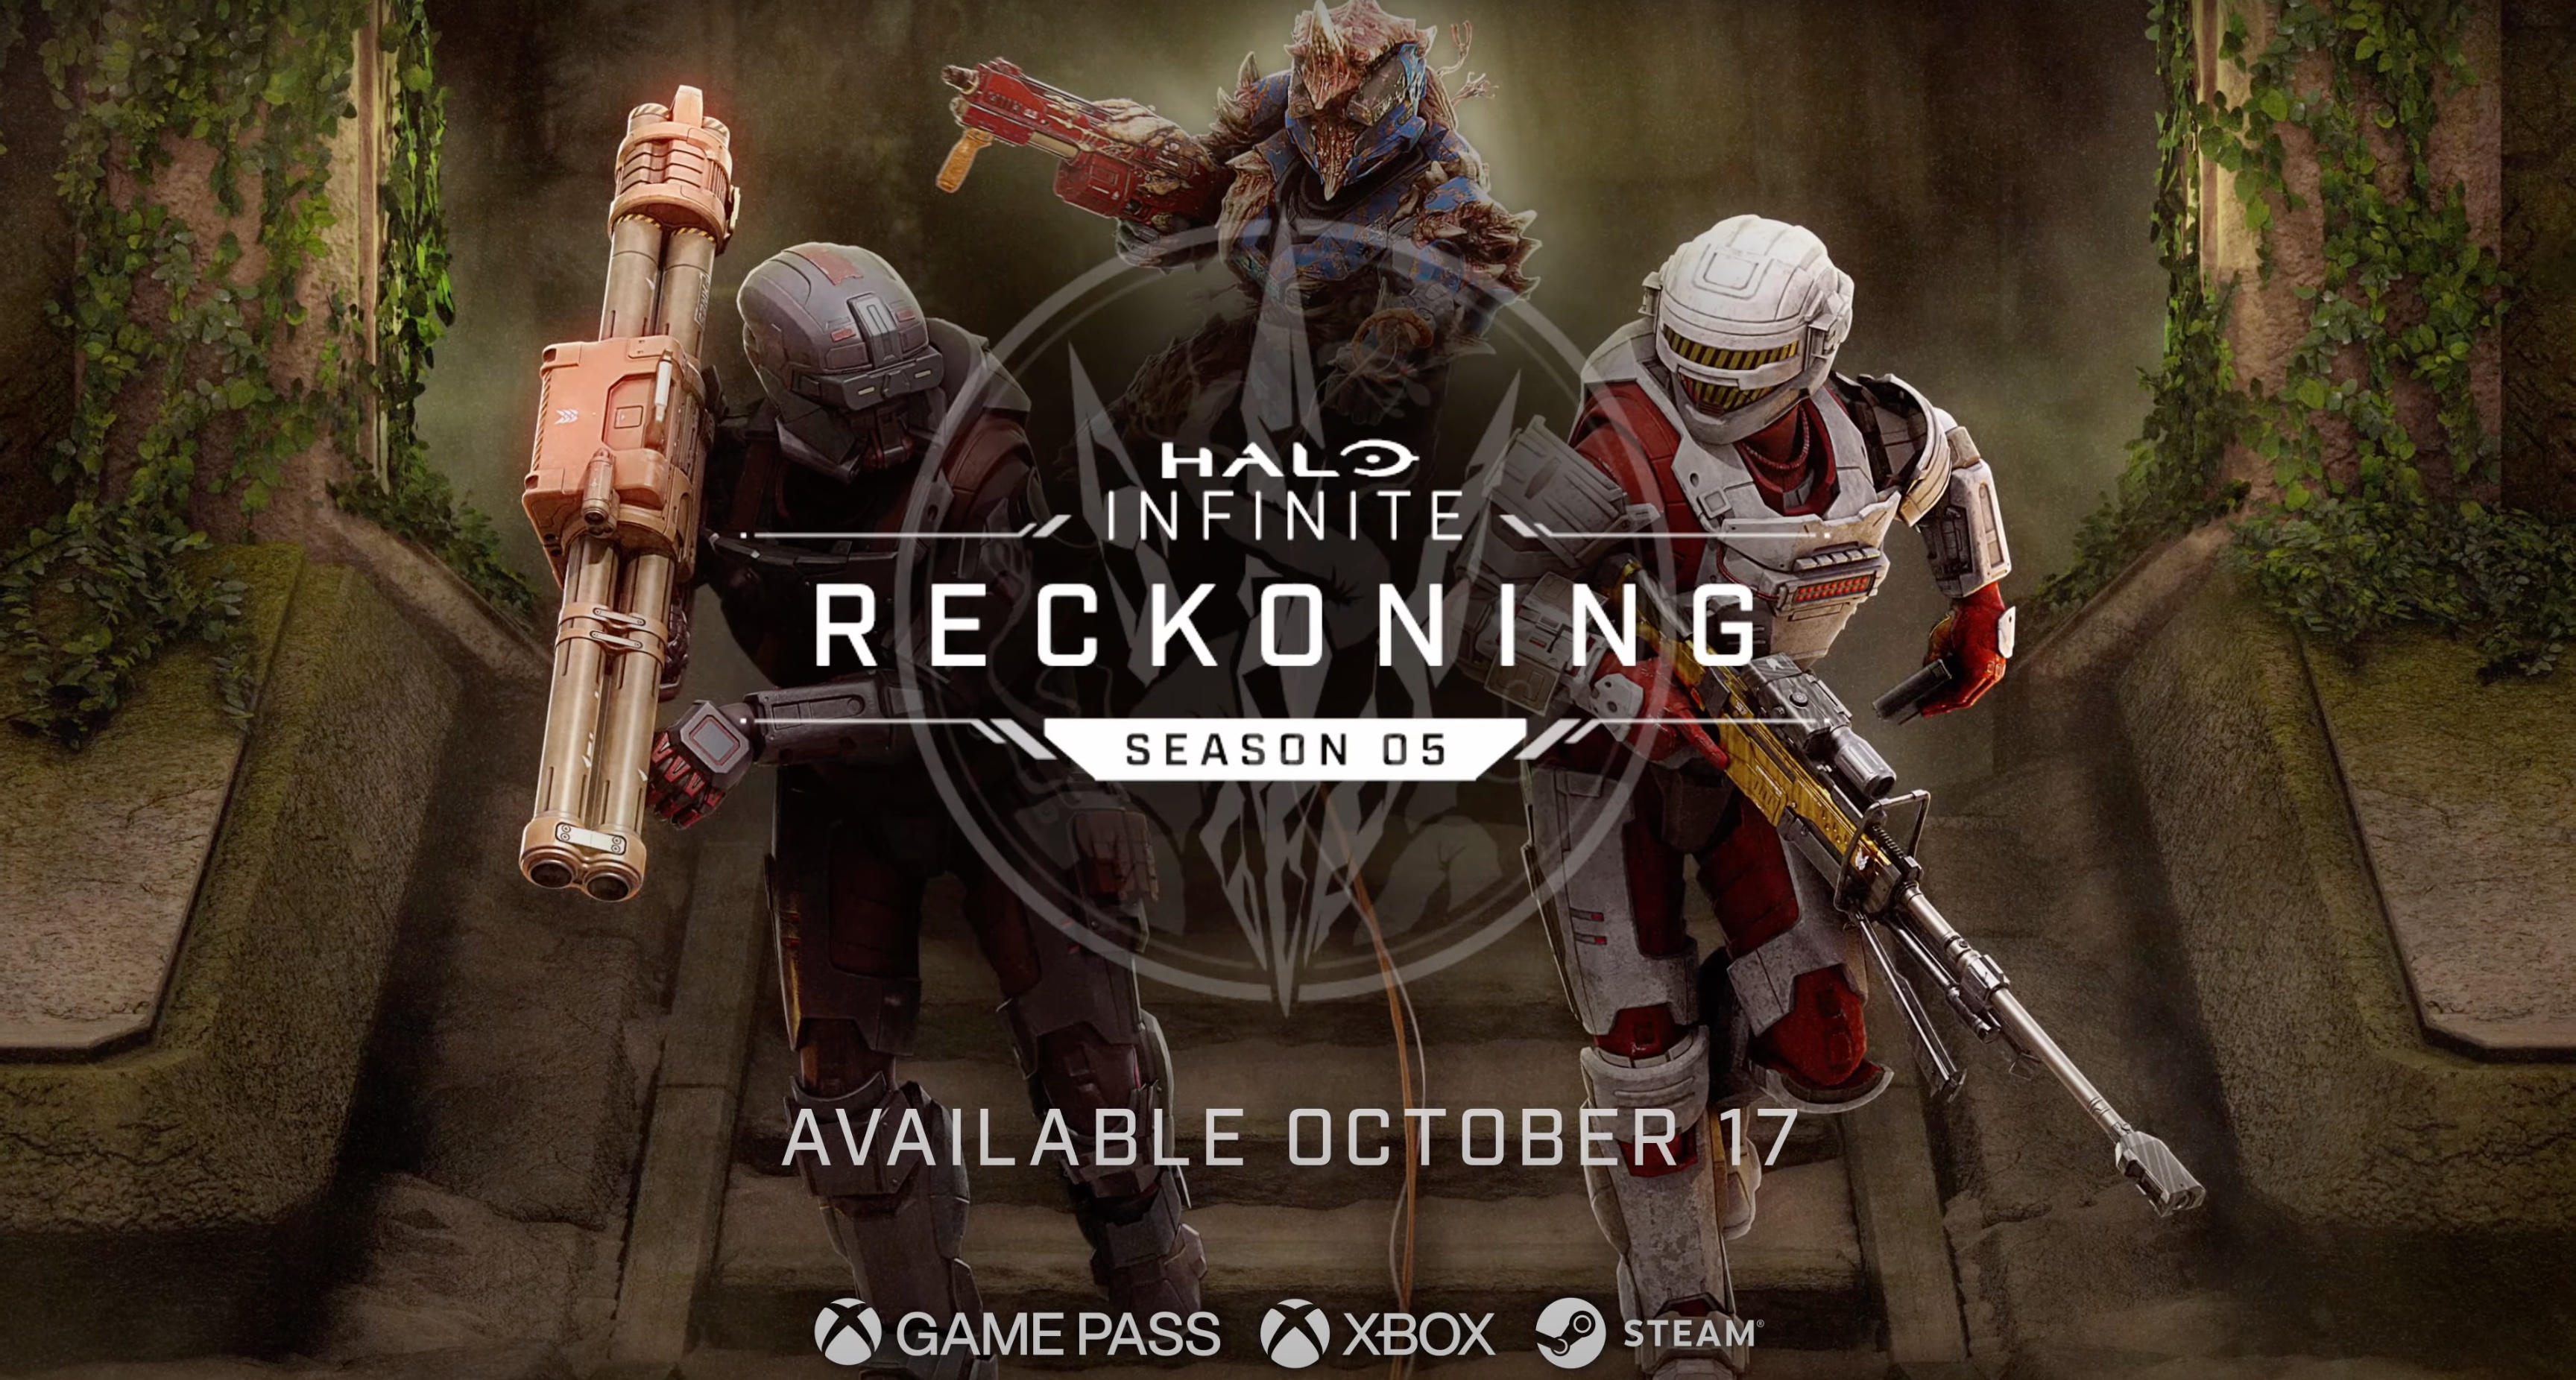 Halo on X: A reckoning has come – Season 5 of Halo Infinite is here! Hop  into #HaloReckoning and check out these new features 👇 💢 Extraction 💎  Prism (Arena) 🌳 Forbidden (